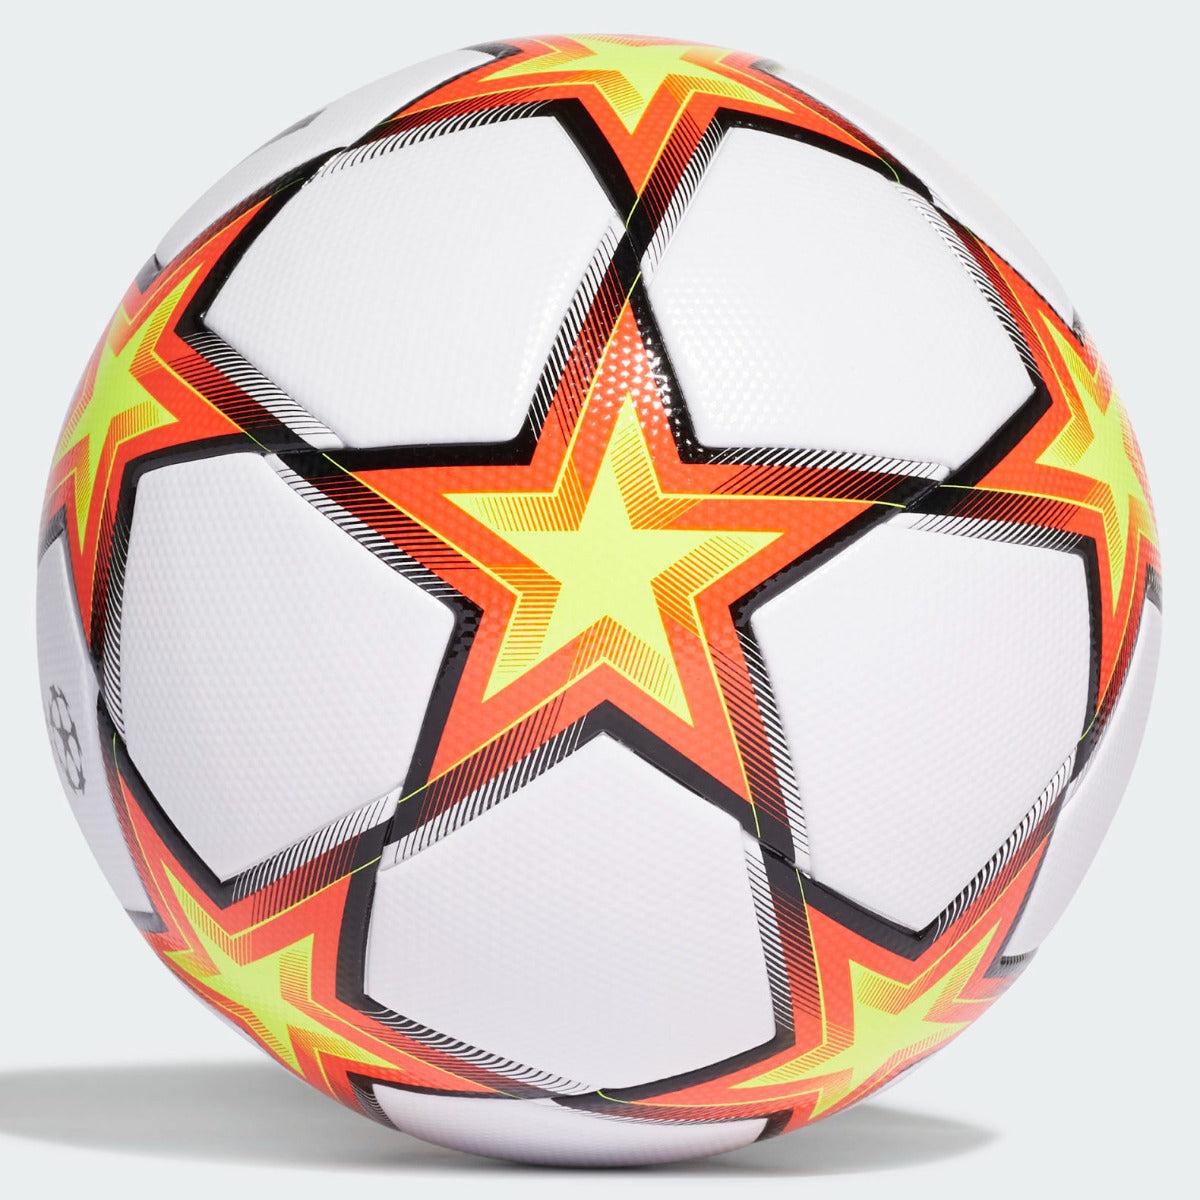 Adidas UCL League Pyrostorm Ball - White-Solar Red-Yellow (Back)